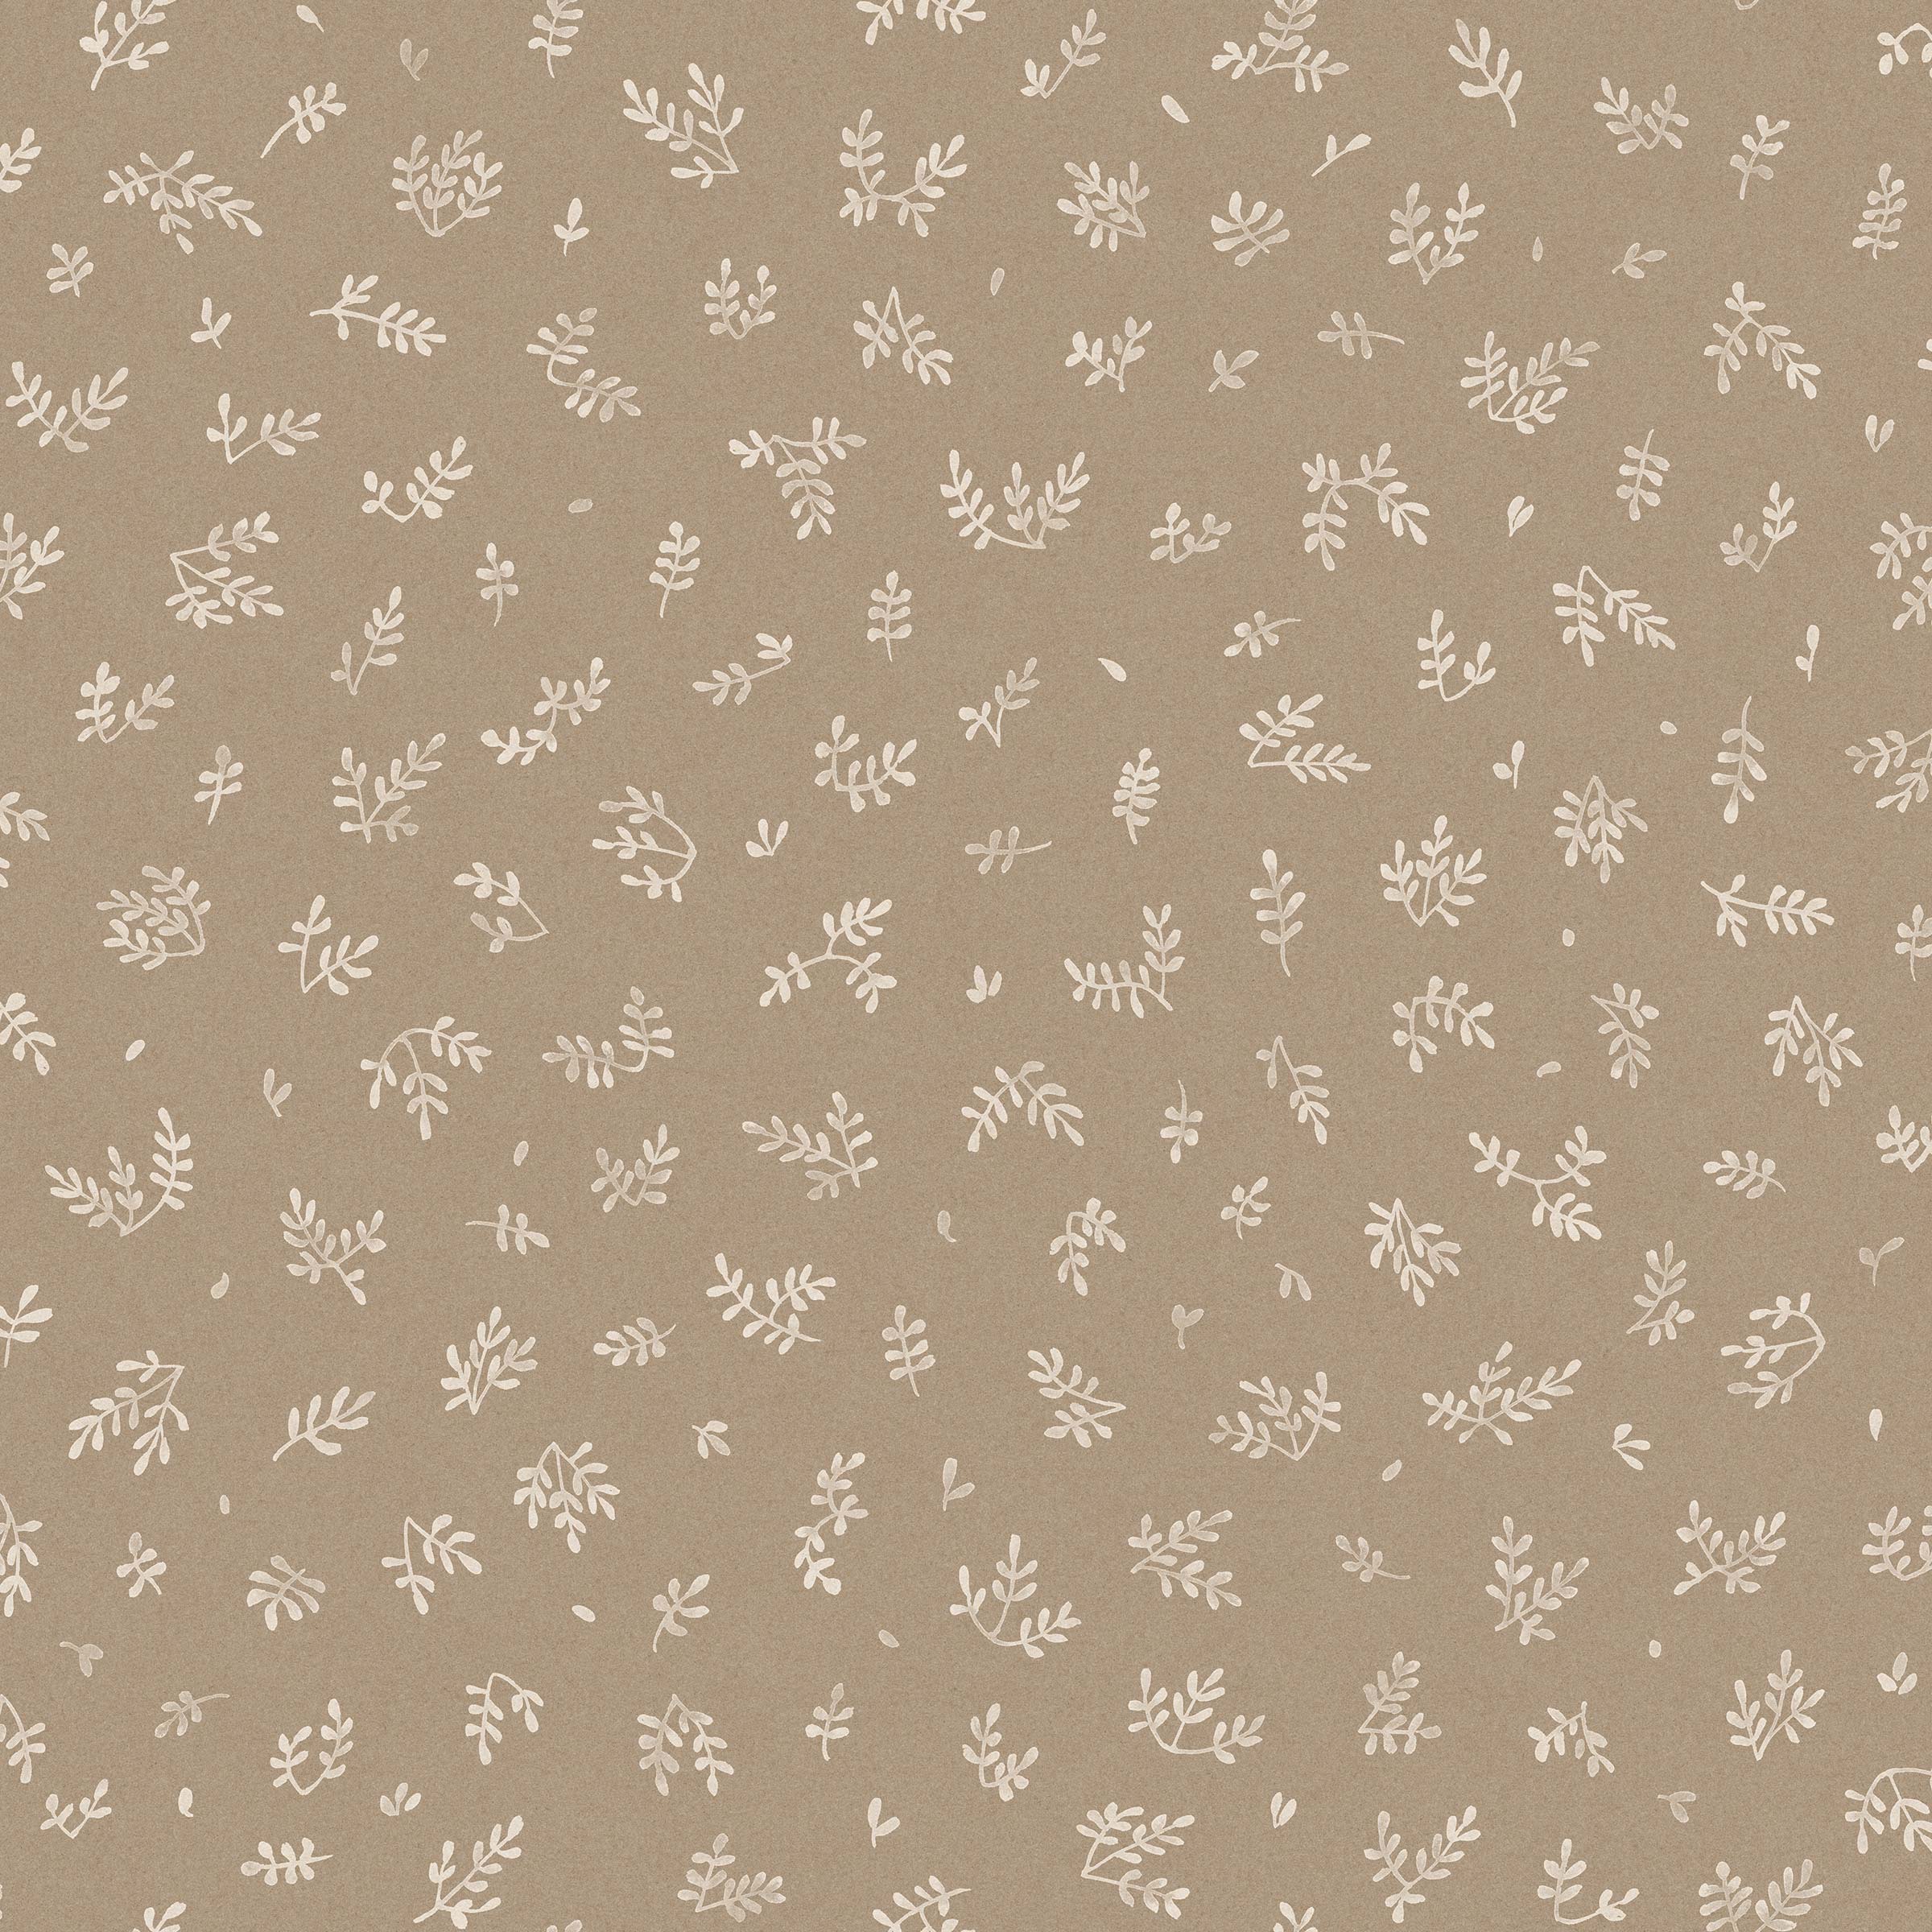 Detail of wallpaper in a minimal repeating leaf print in cream on a light brown field.